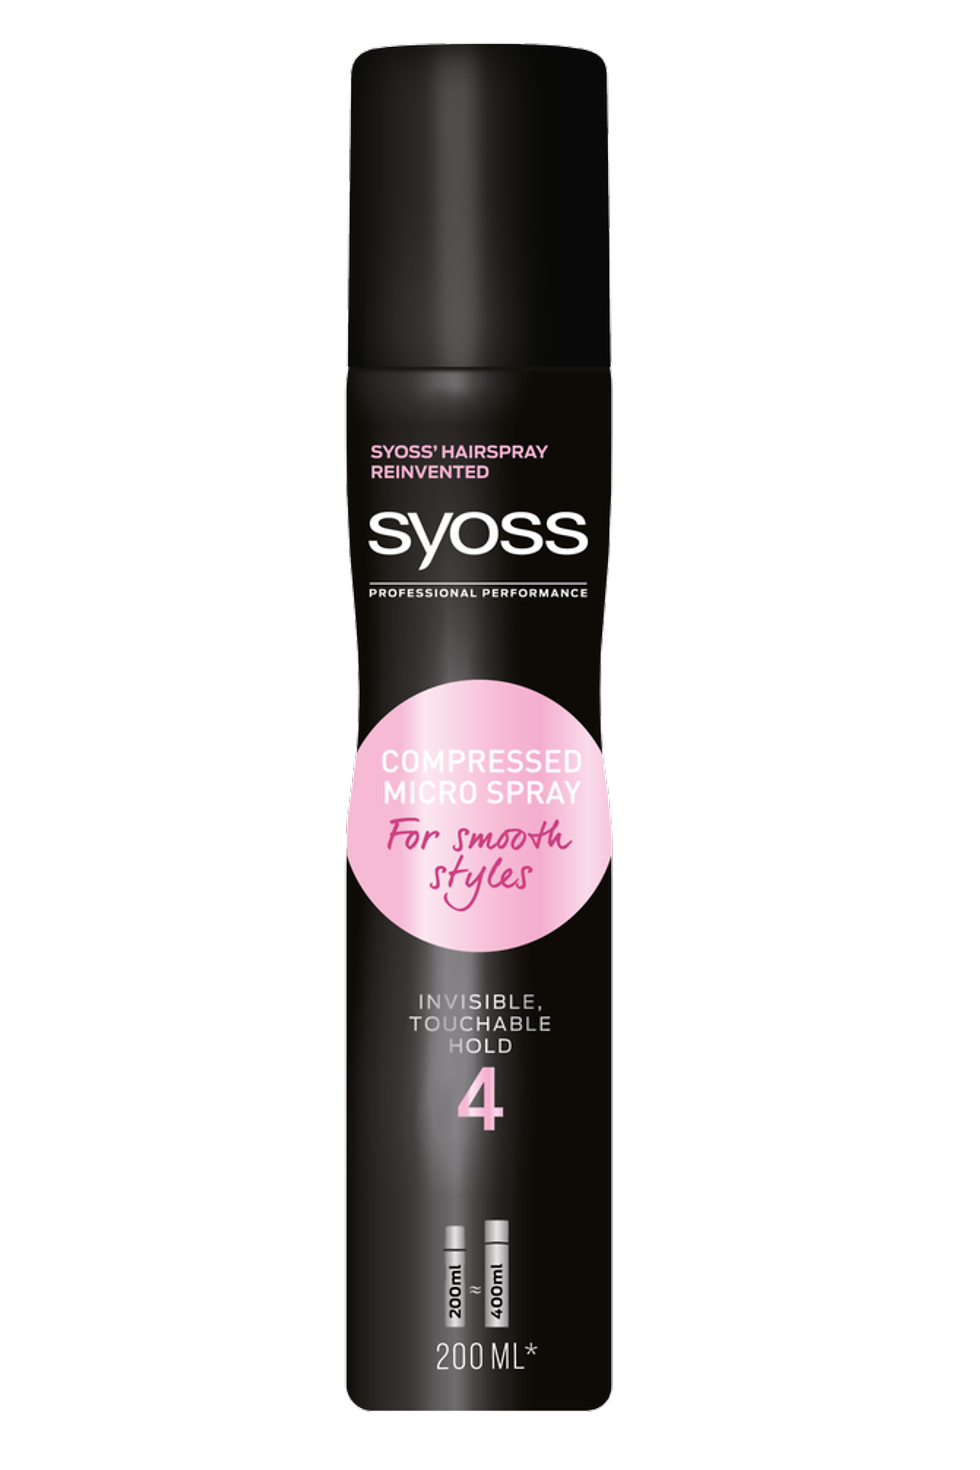 Syoss Compressed Micro Spray for sleek styles